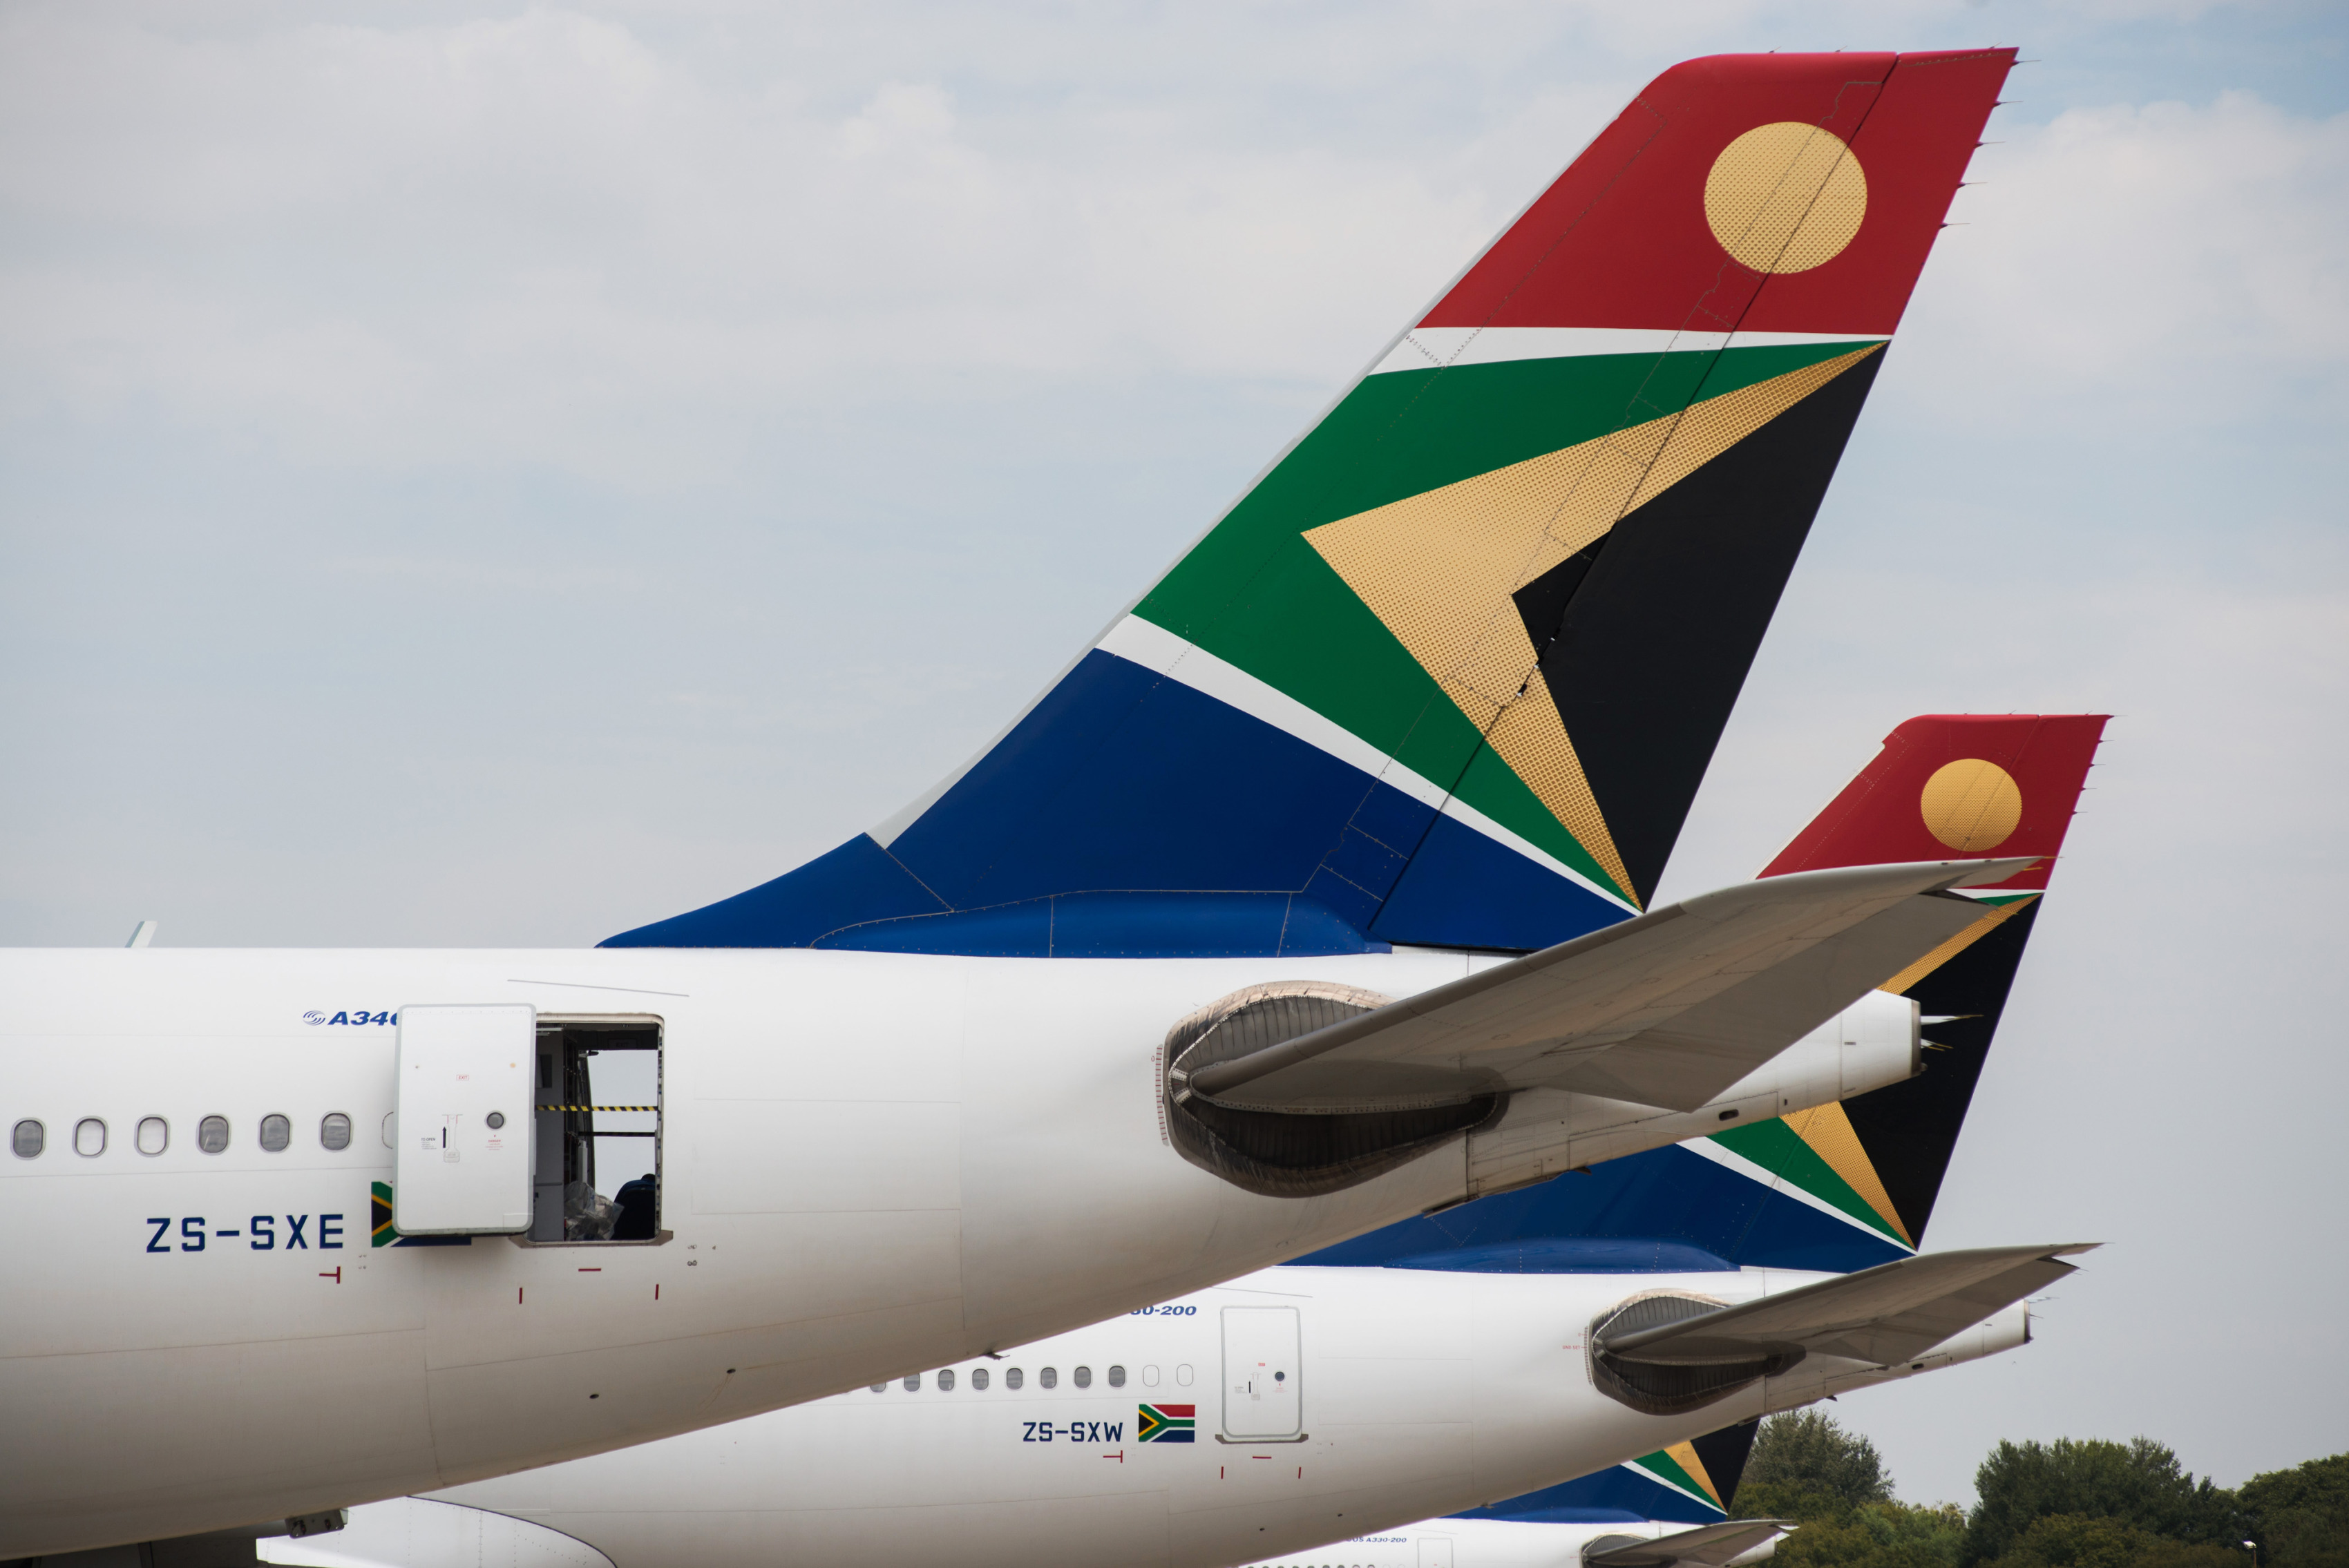 The logo of South African Airways sits on the tailfins of aircraft in Johannesburg, South Africa.